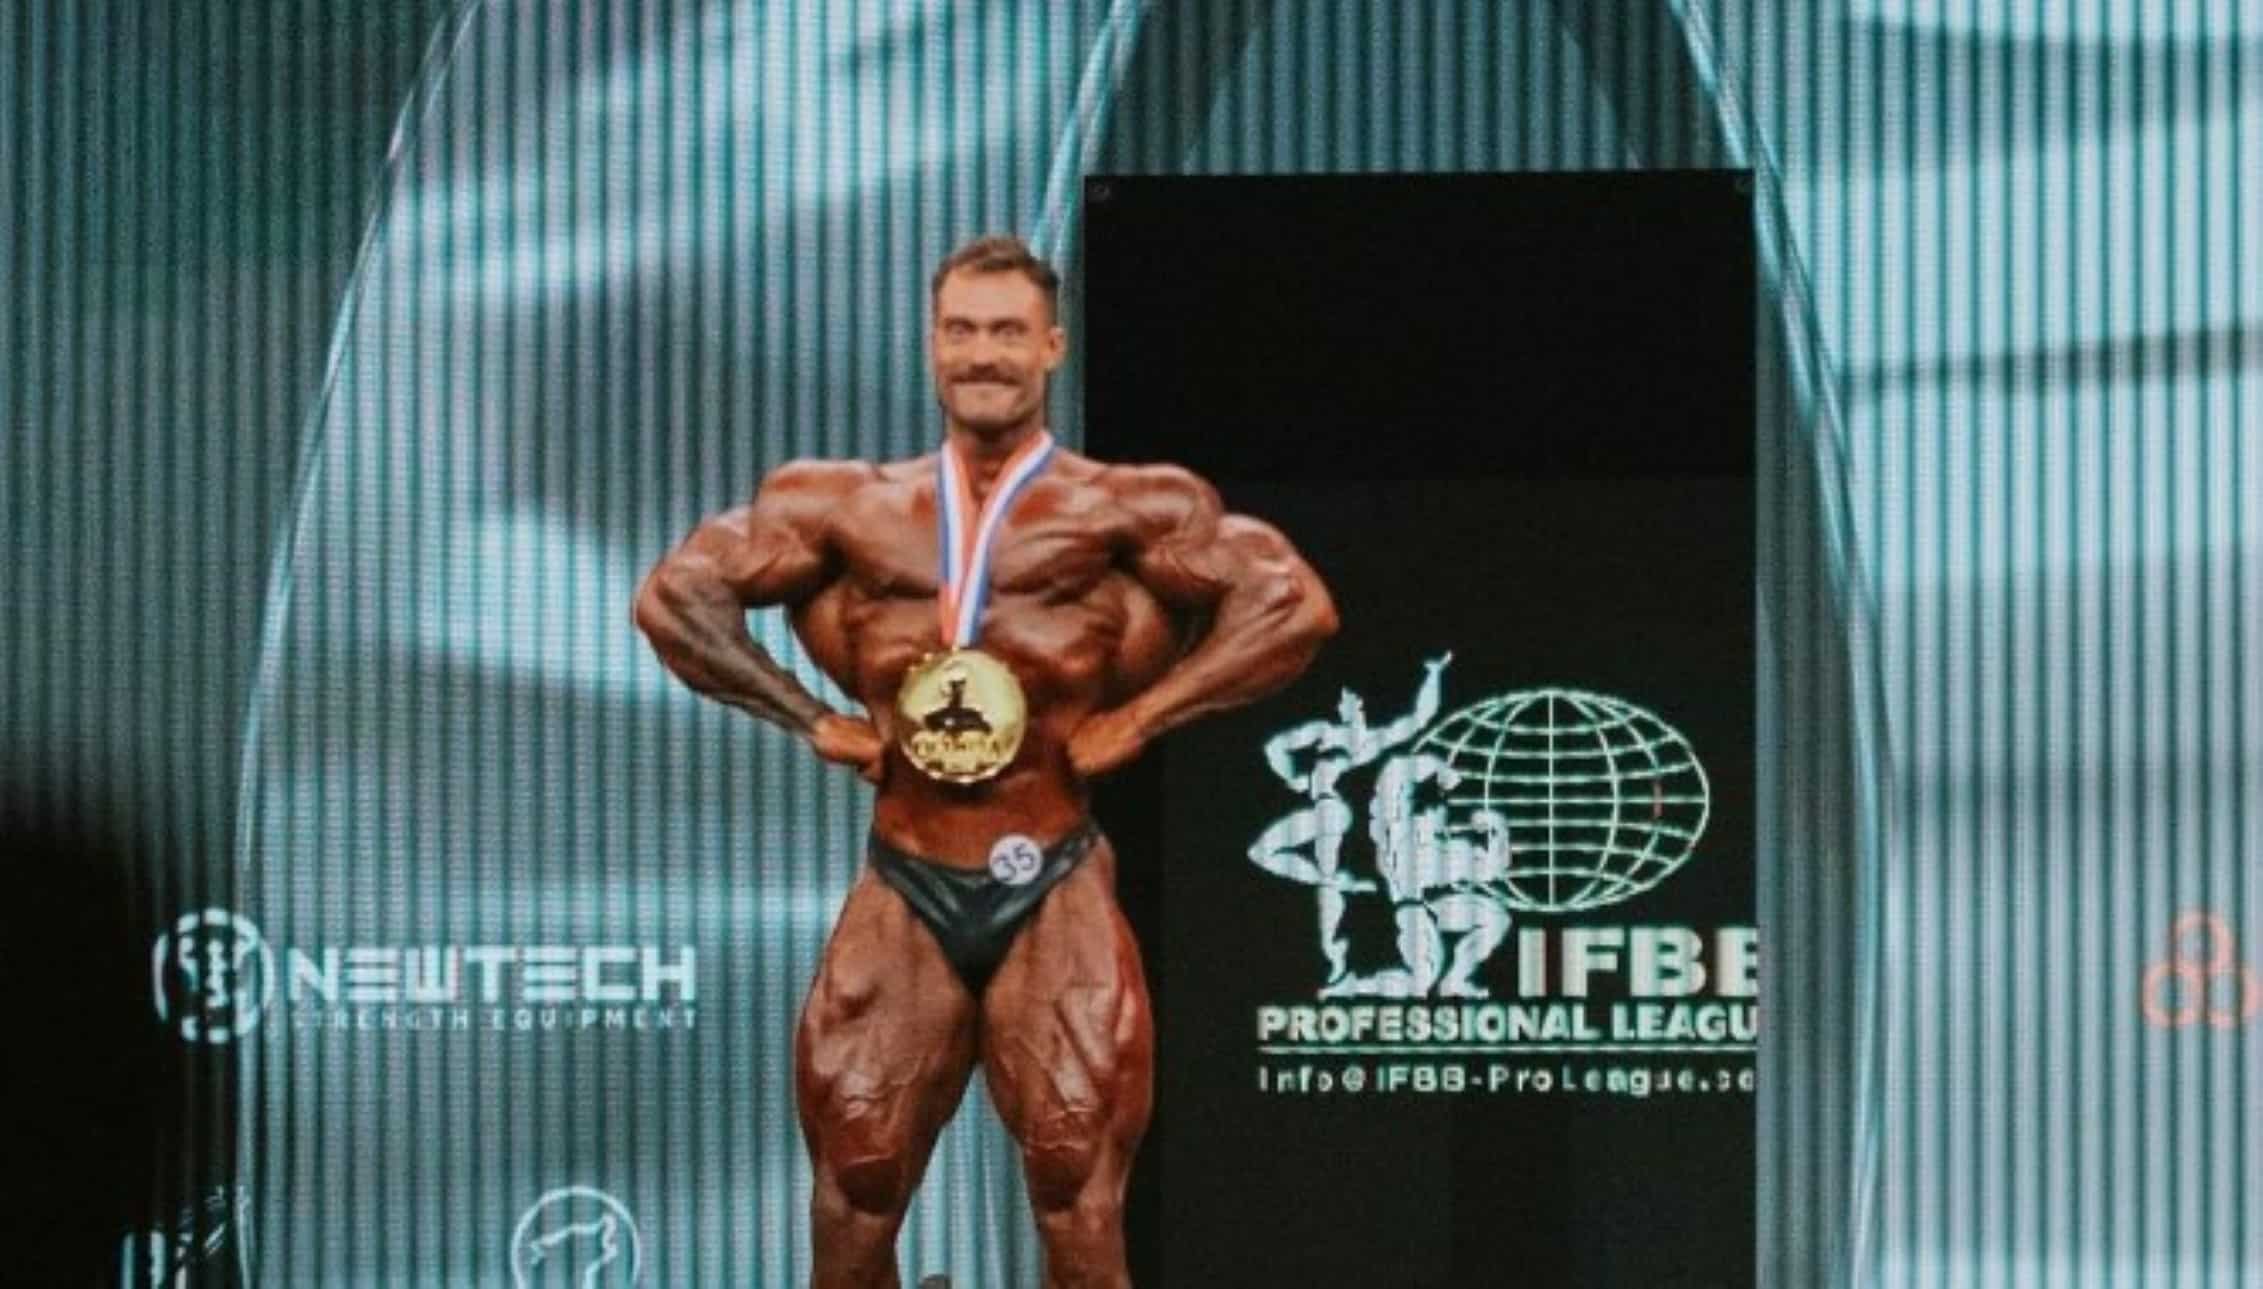 Only Your Fiancé if…”: 3x Mr. Olympia Chris Bumstead Clarified His